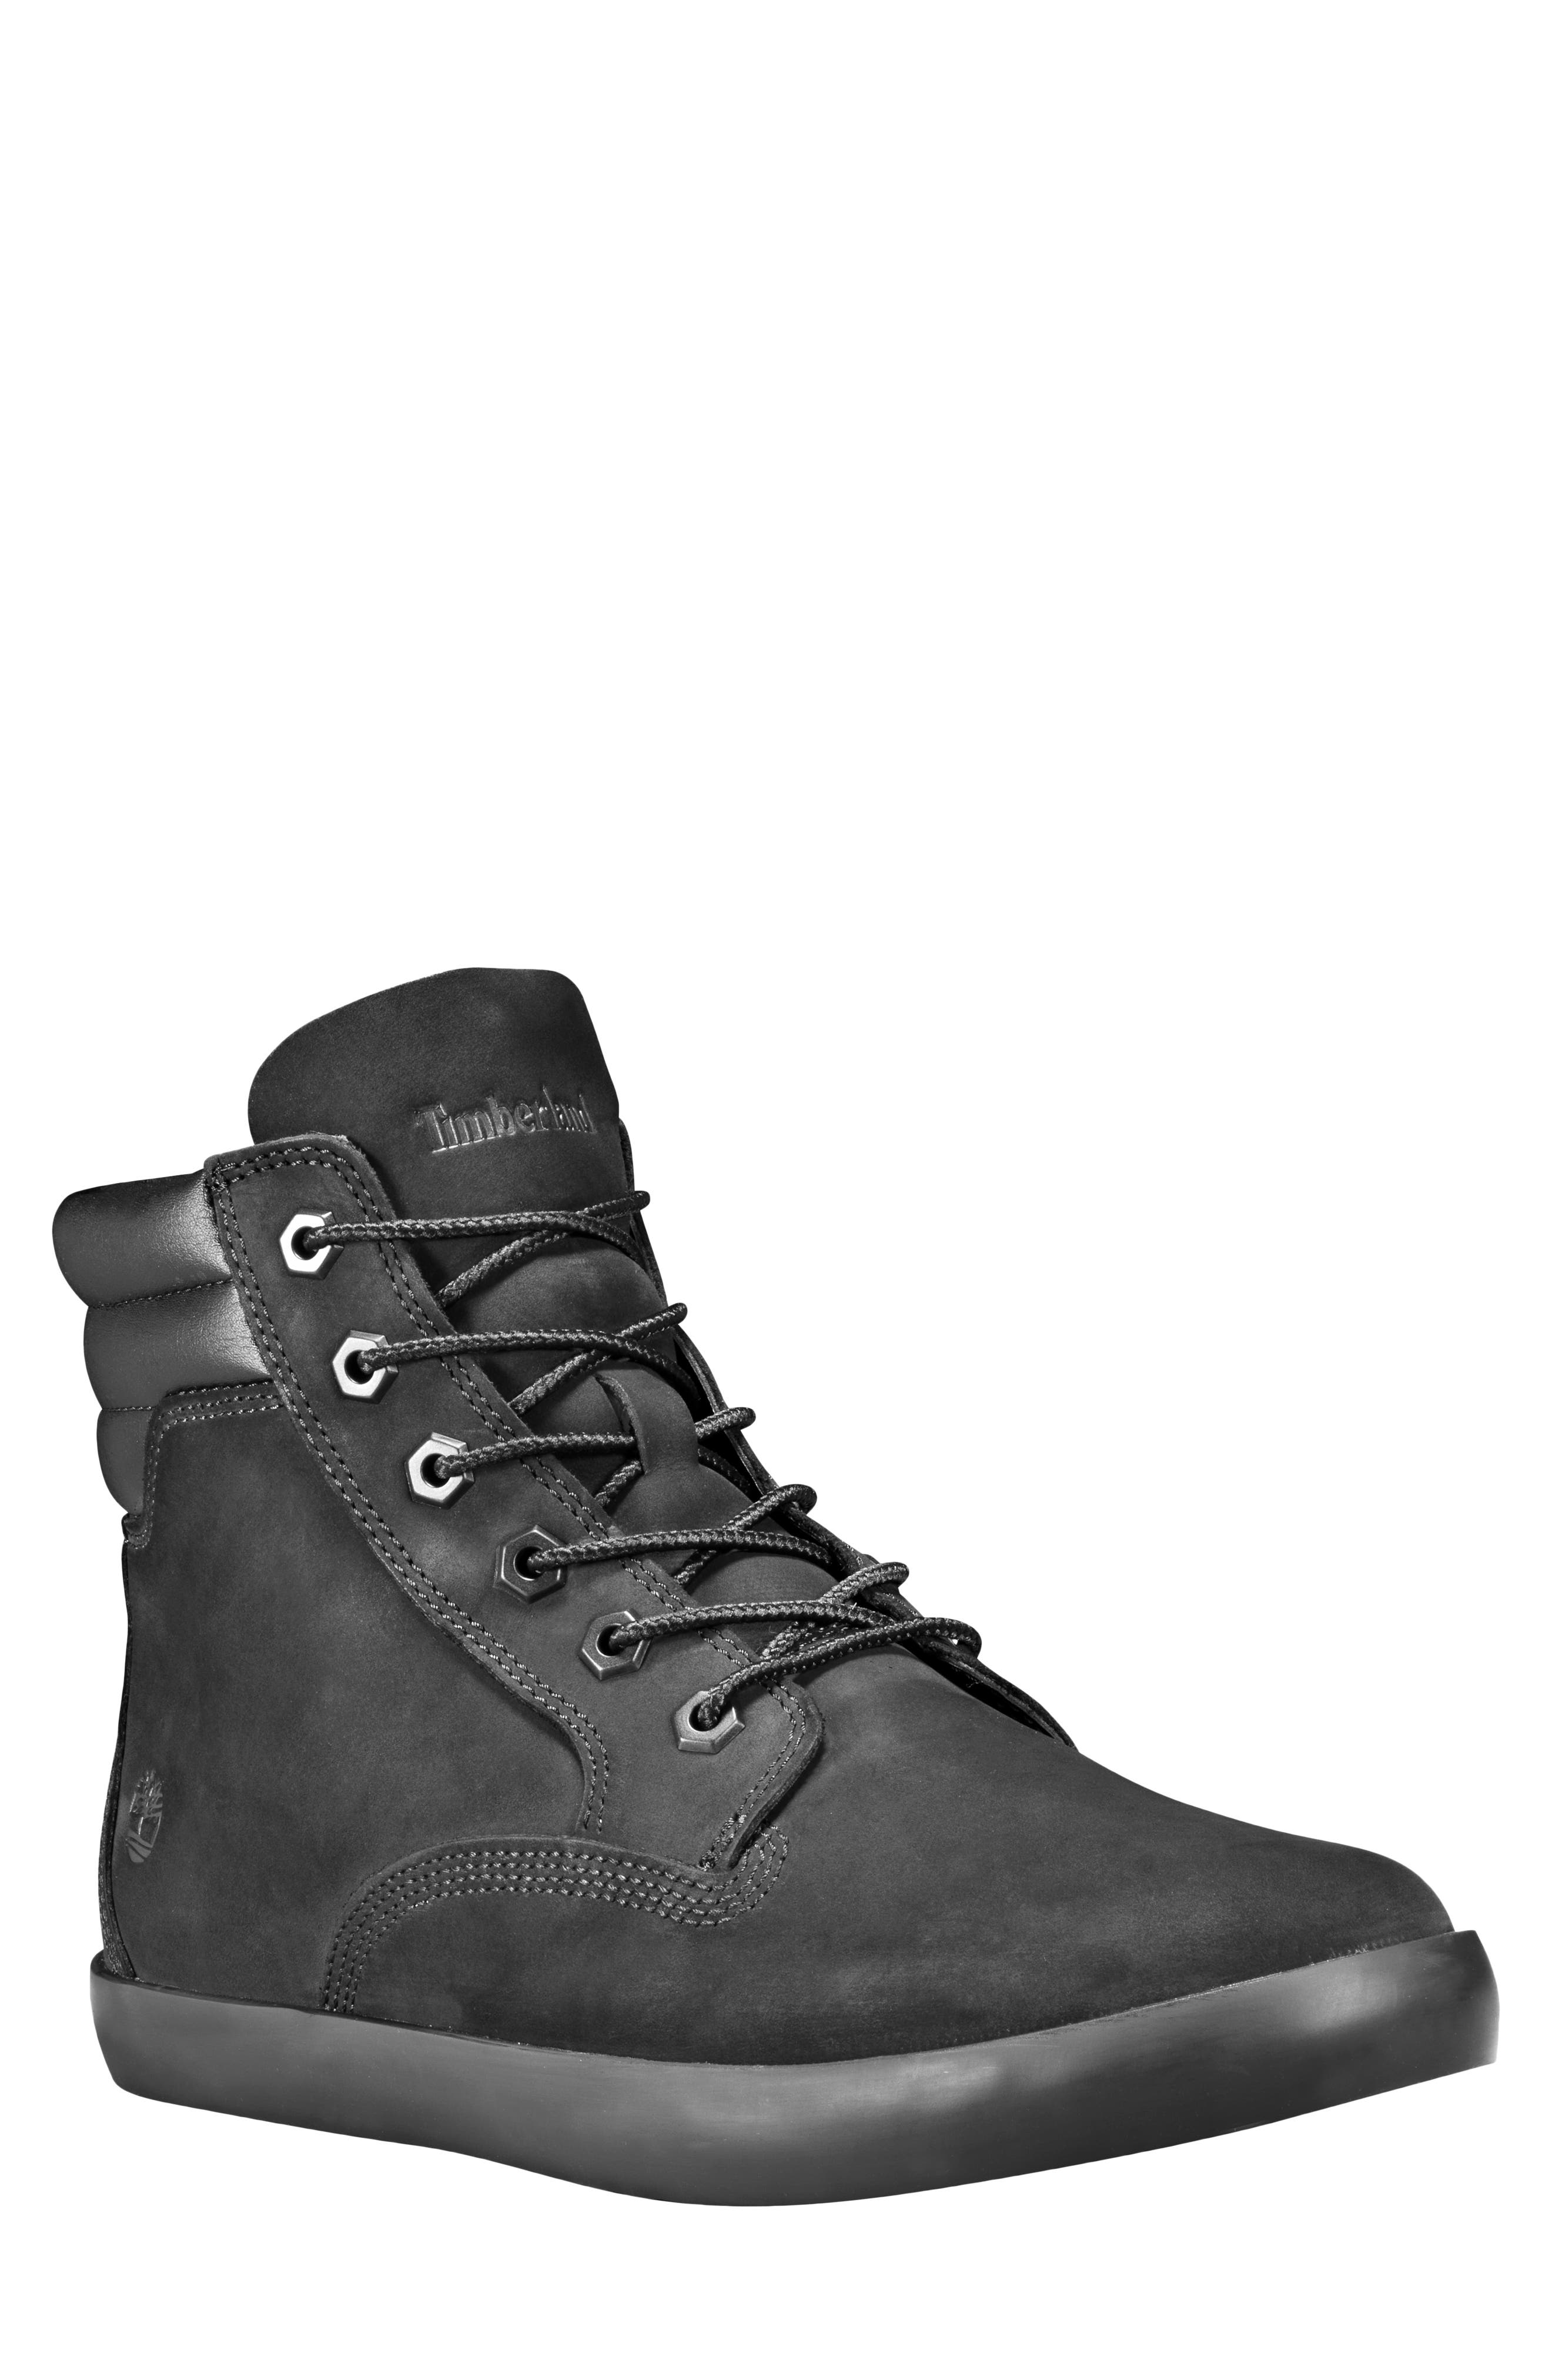 women's timberland boots clearance